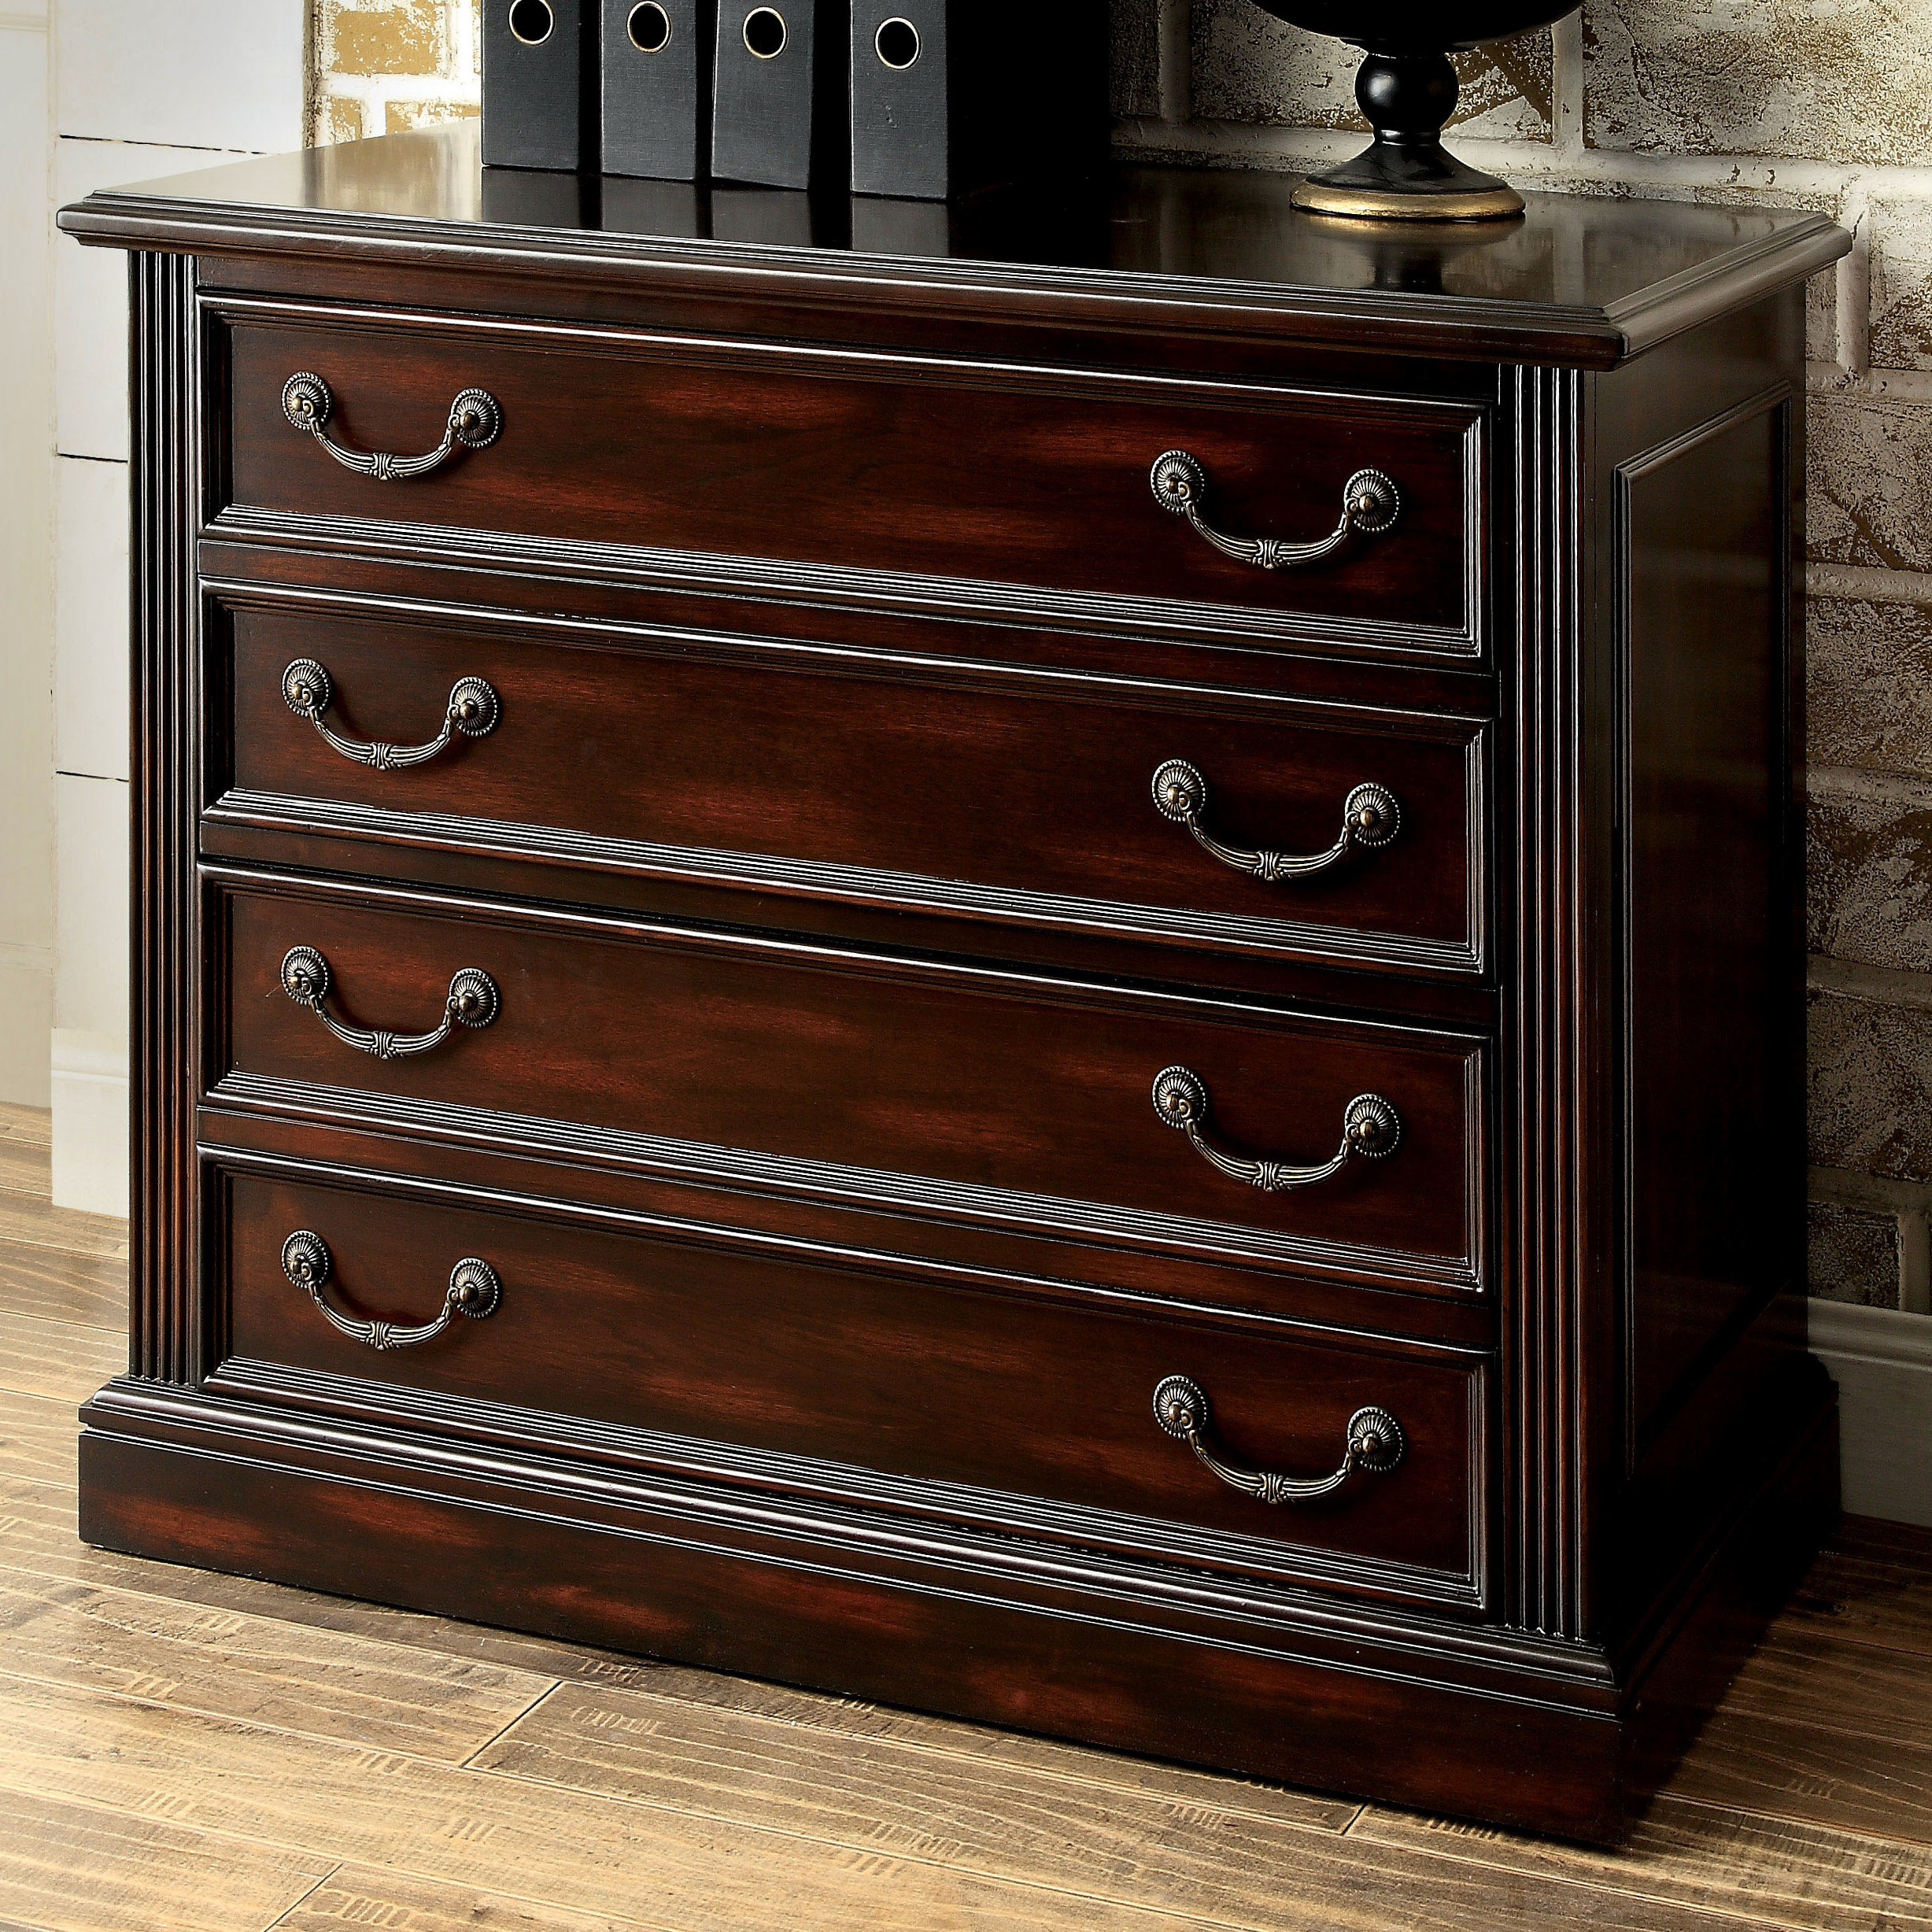 Dar Home Co Gertrude 4 Drawer Lateral Filing Cabinet Wayfair within measurements 2455 X 2455